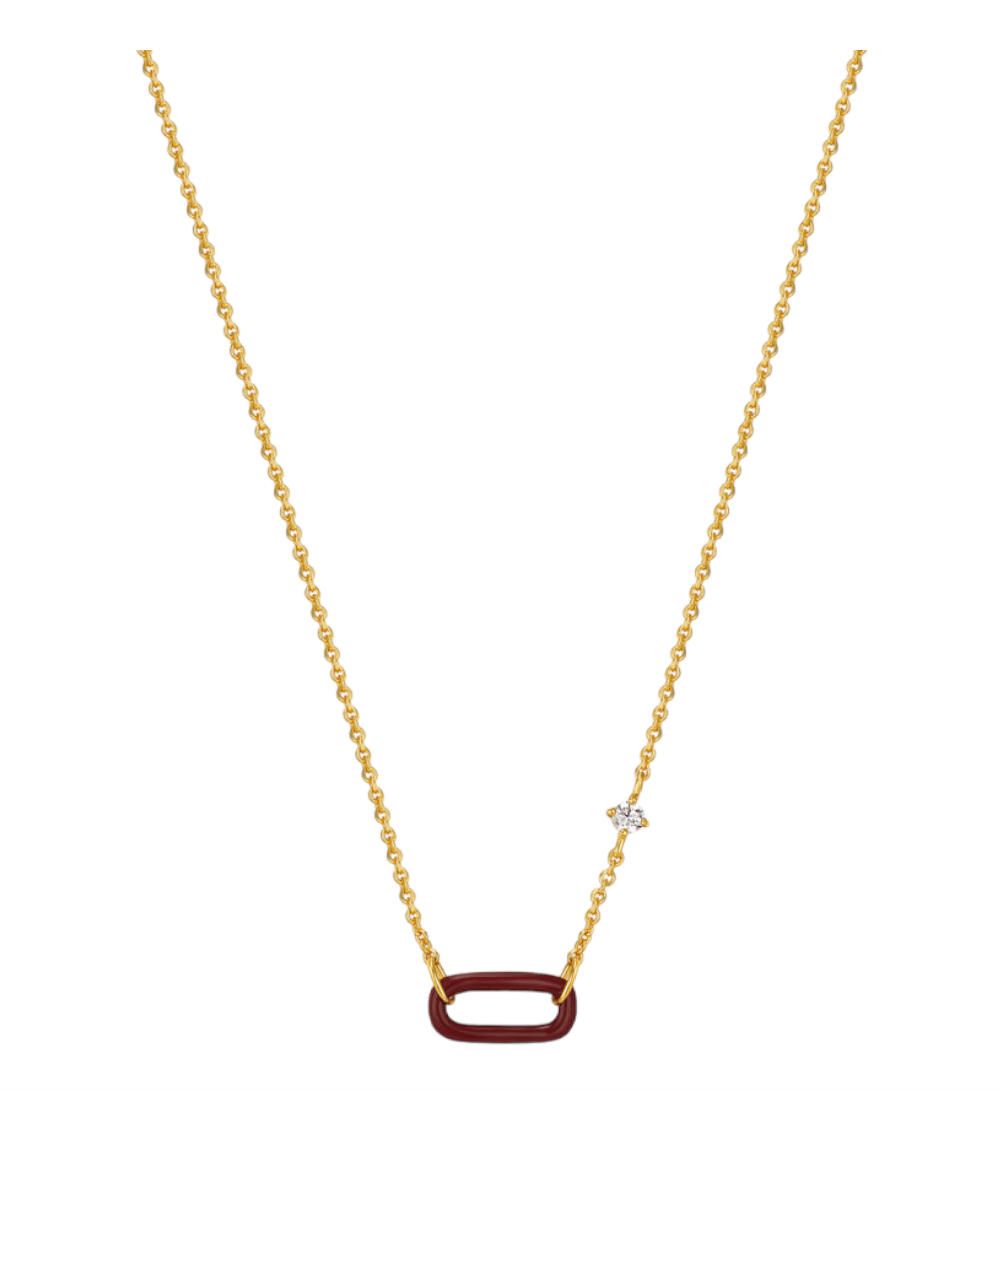 Claret red Ebamel Gold Link Necklace Ania Haie